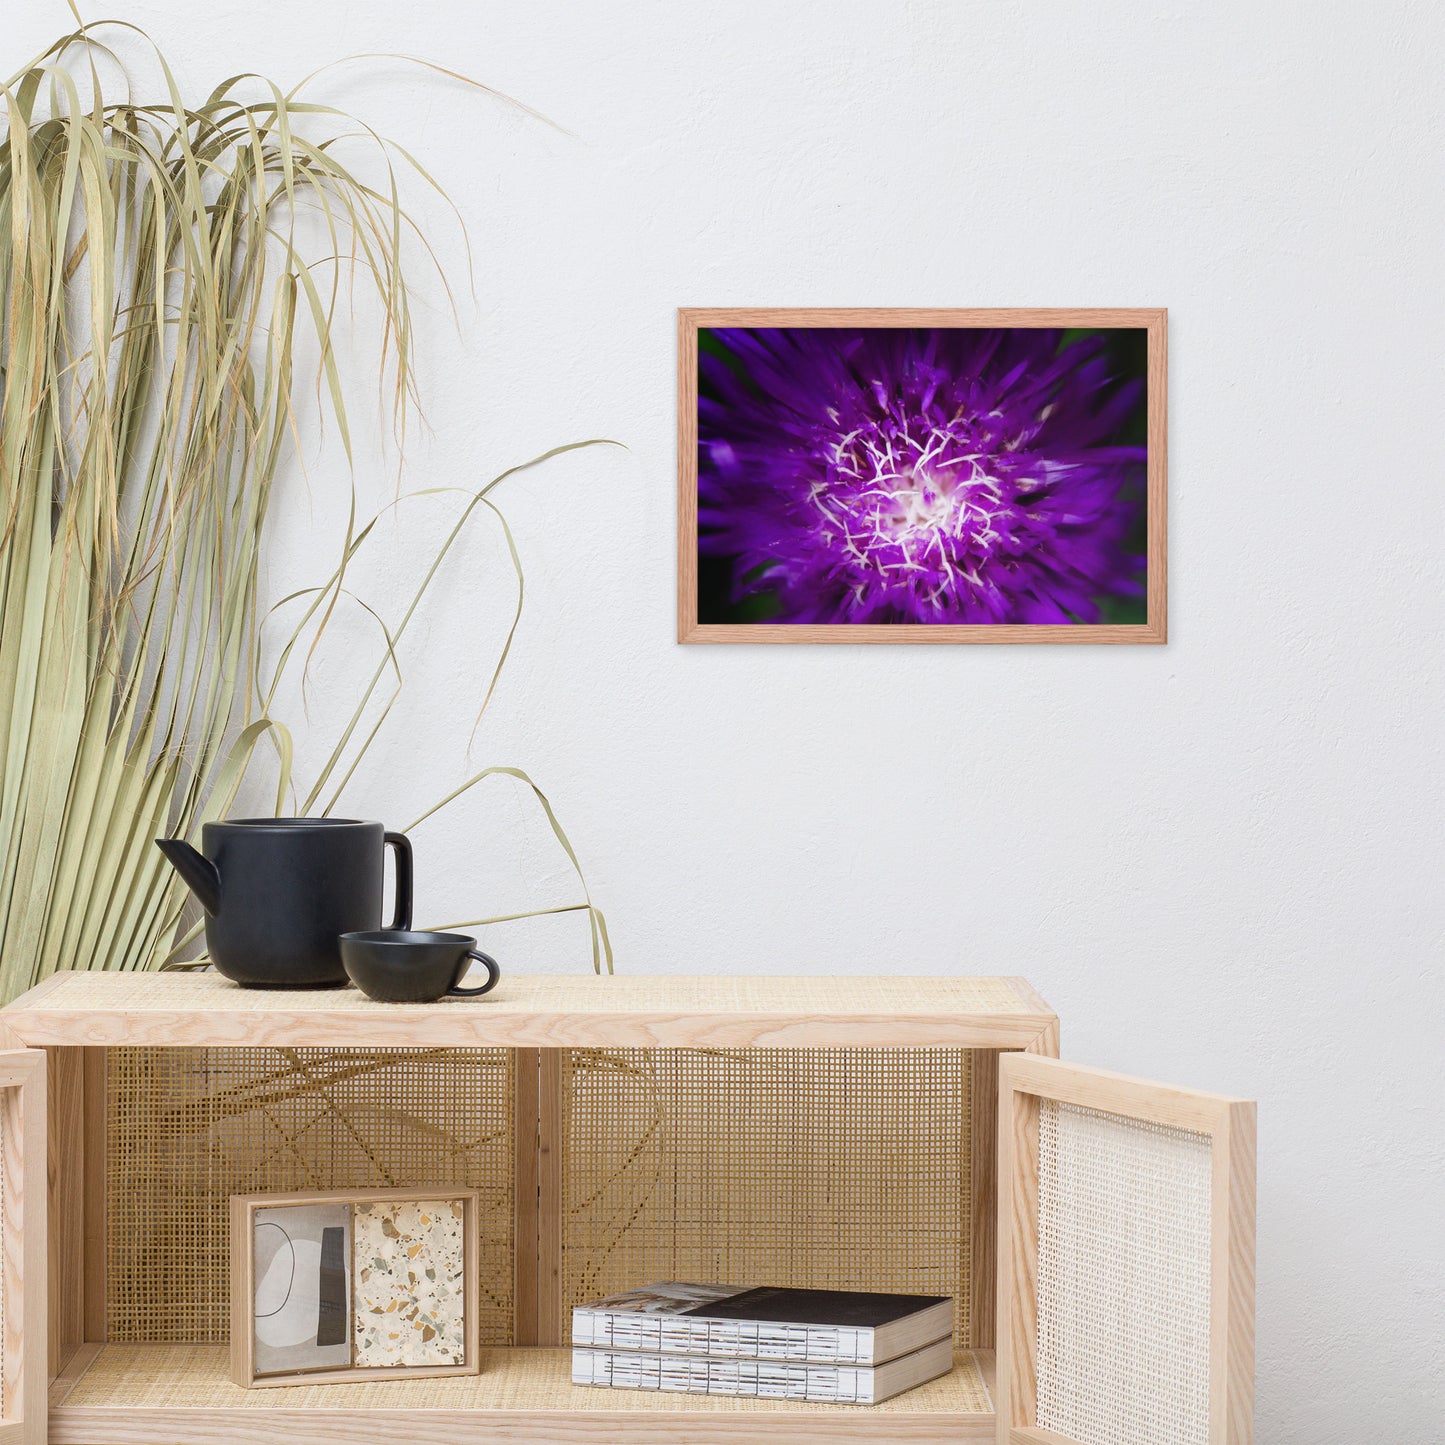 Bright Prints For Living Room: Purple Abstract Flower - Botanical / Floral / Flora / Flowers / Nature Photograph Framed Wall Art Print - Artwork - Wall Decor